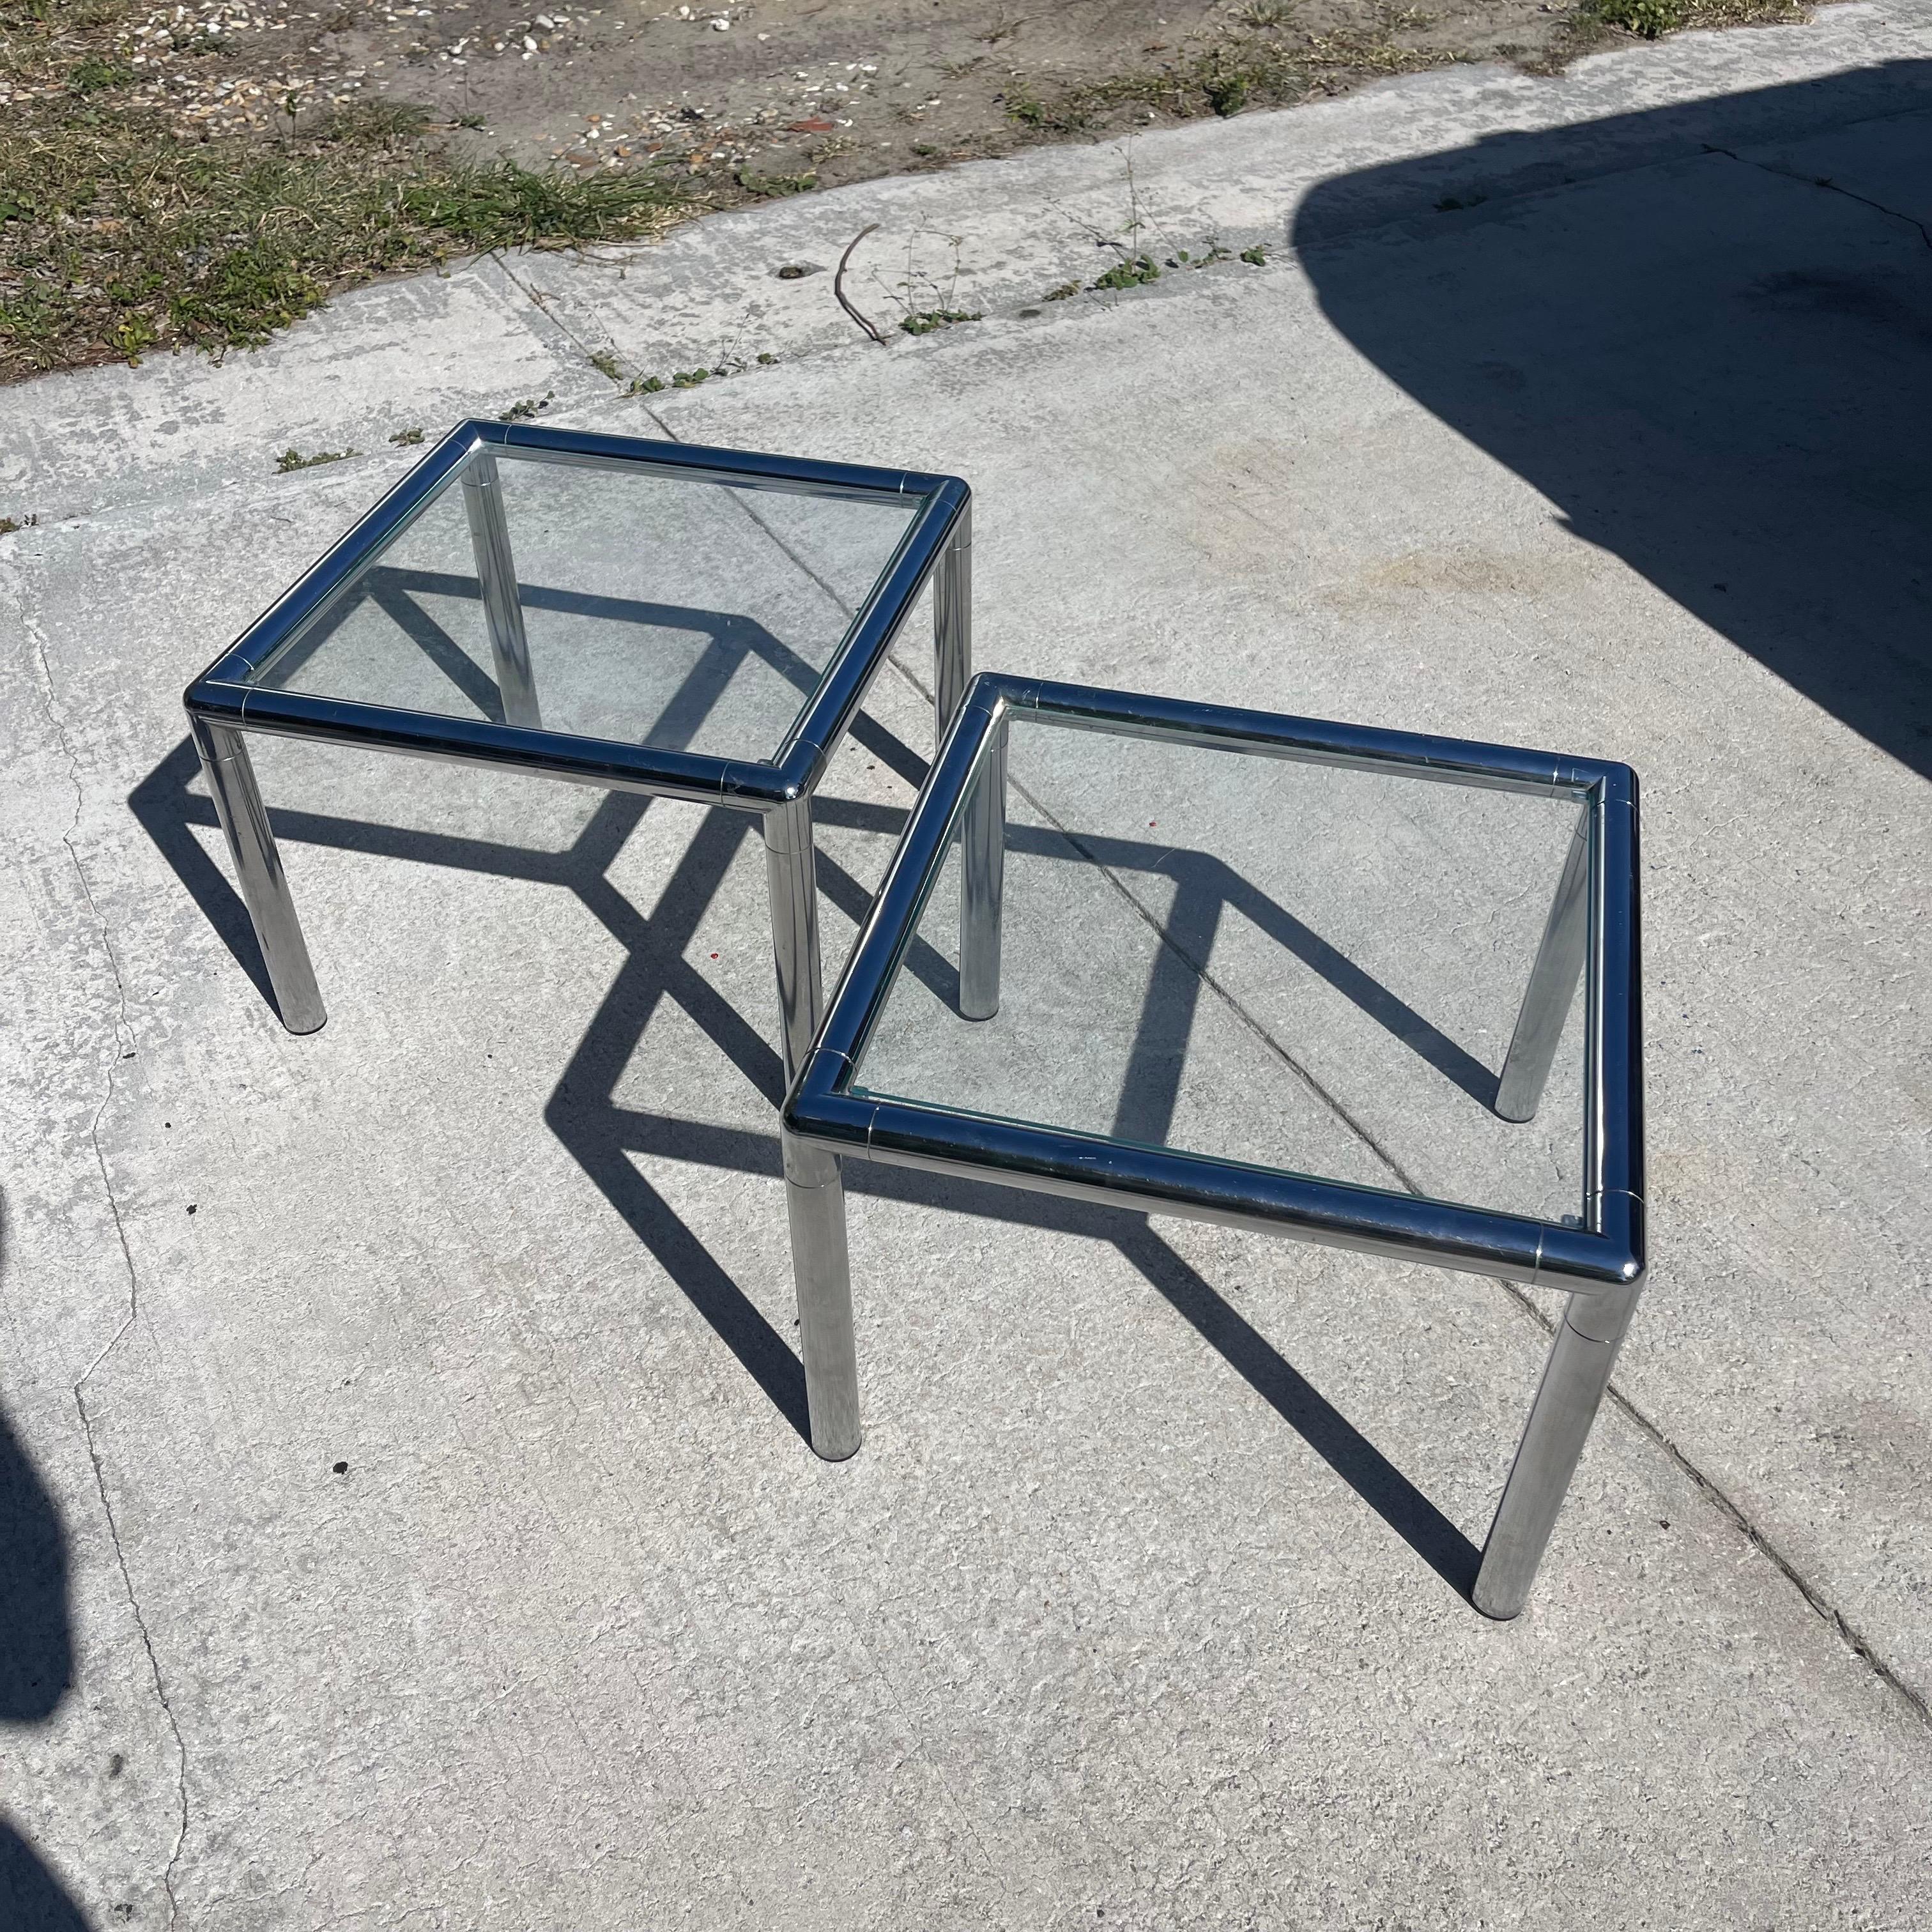 Fabulous pair of mid-century chrome tubular side tables with glass tops.